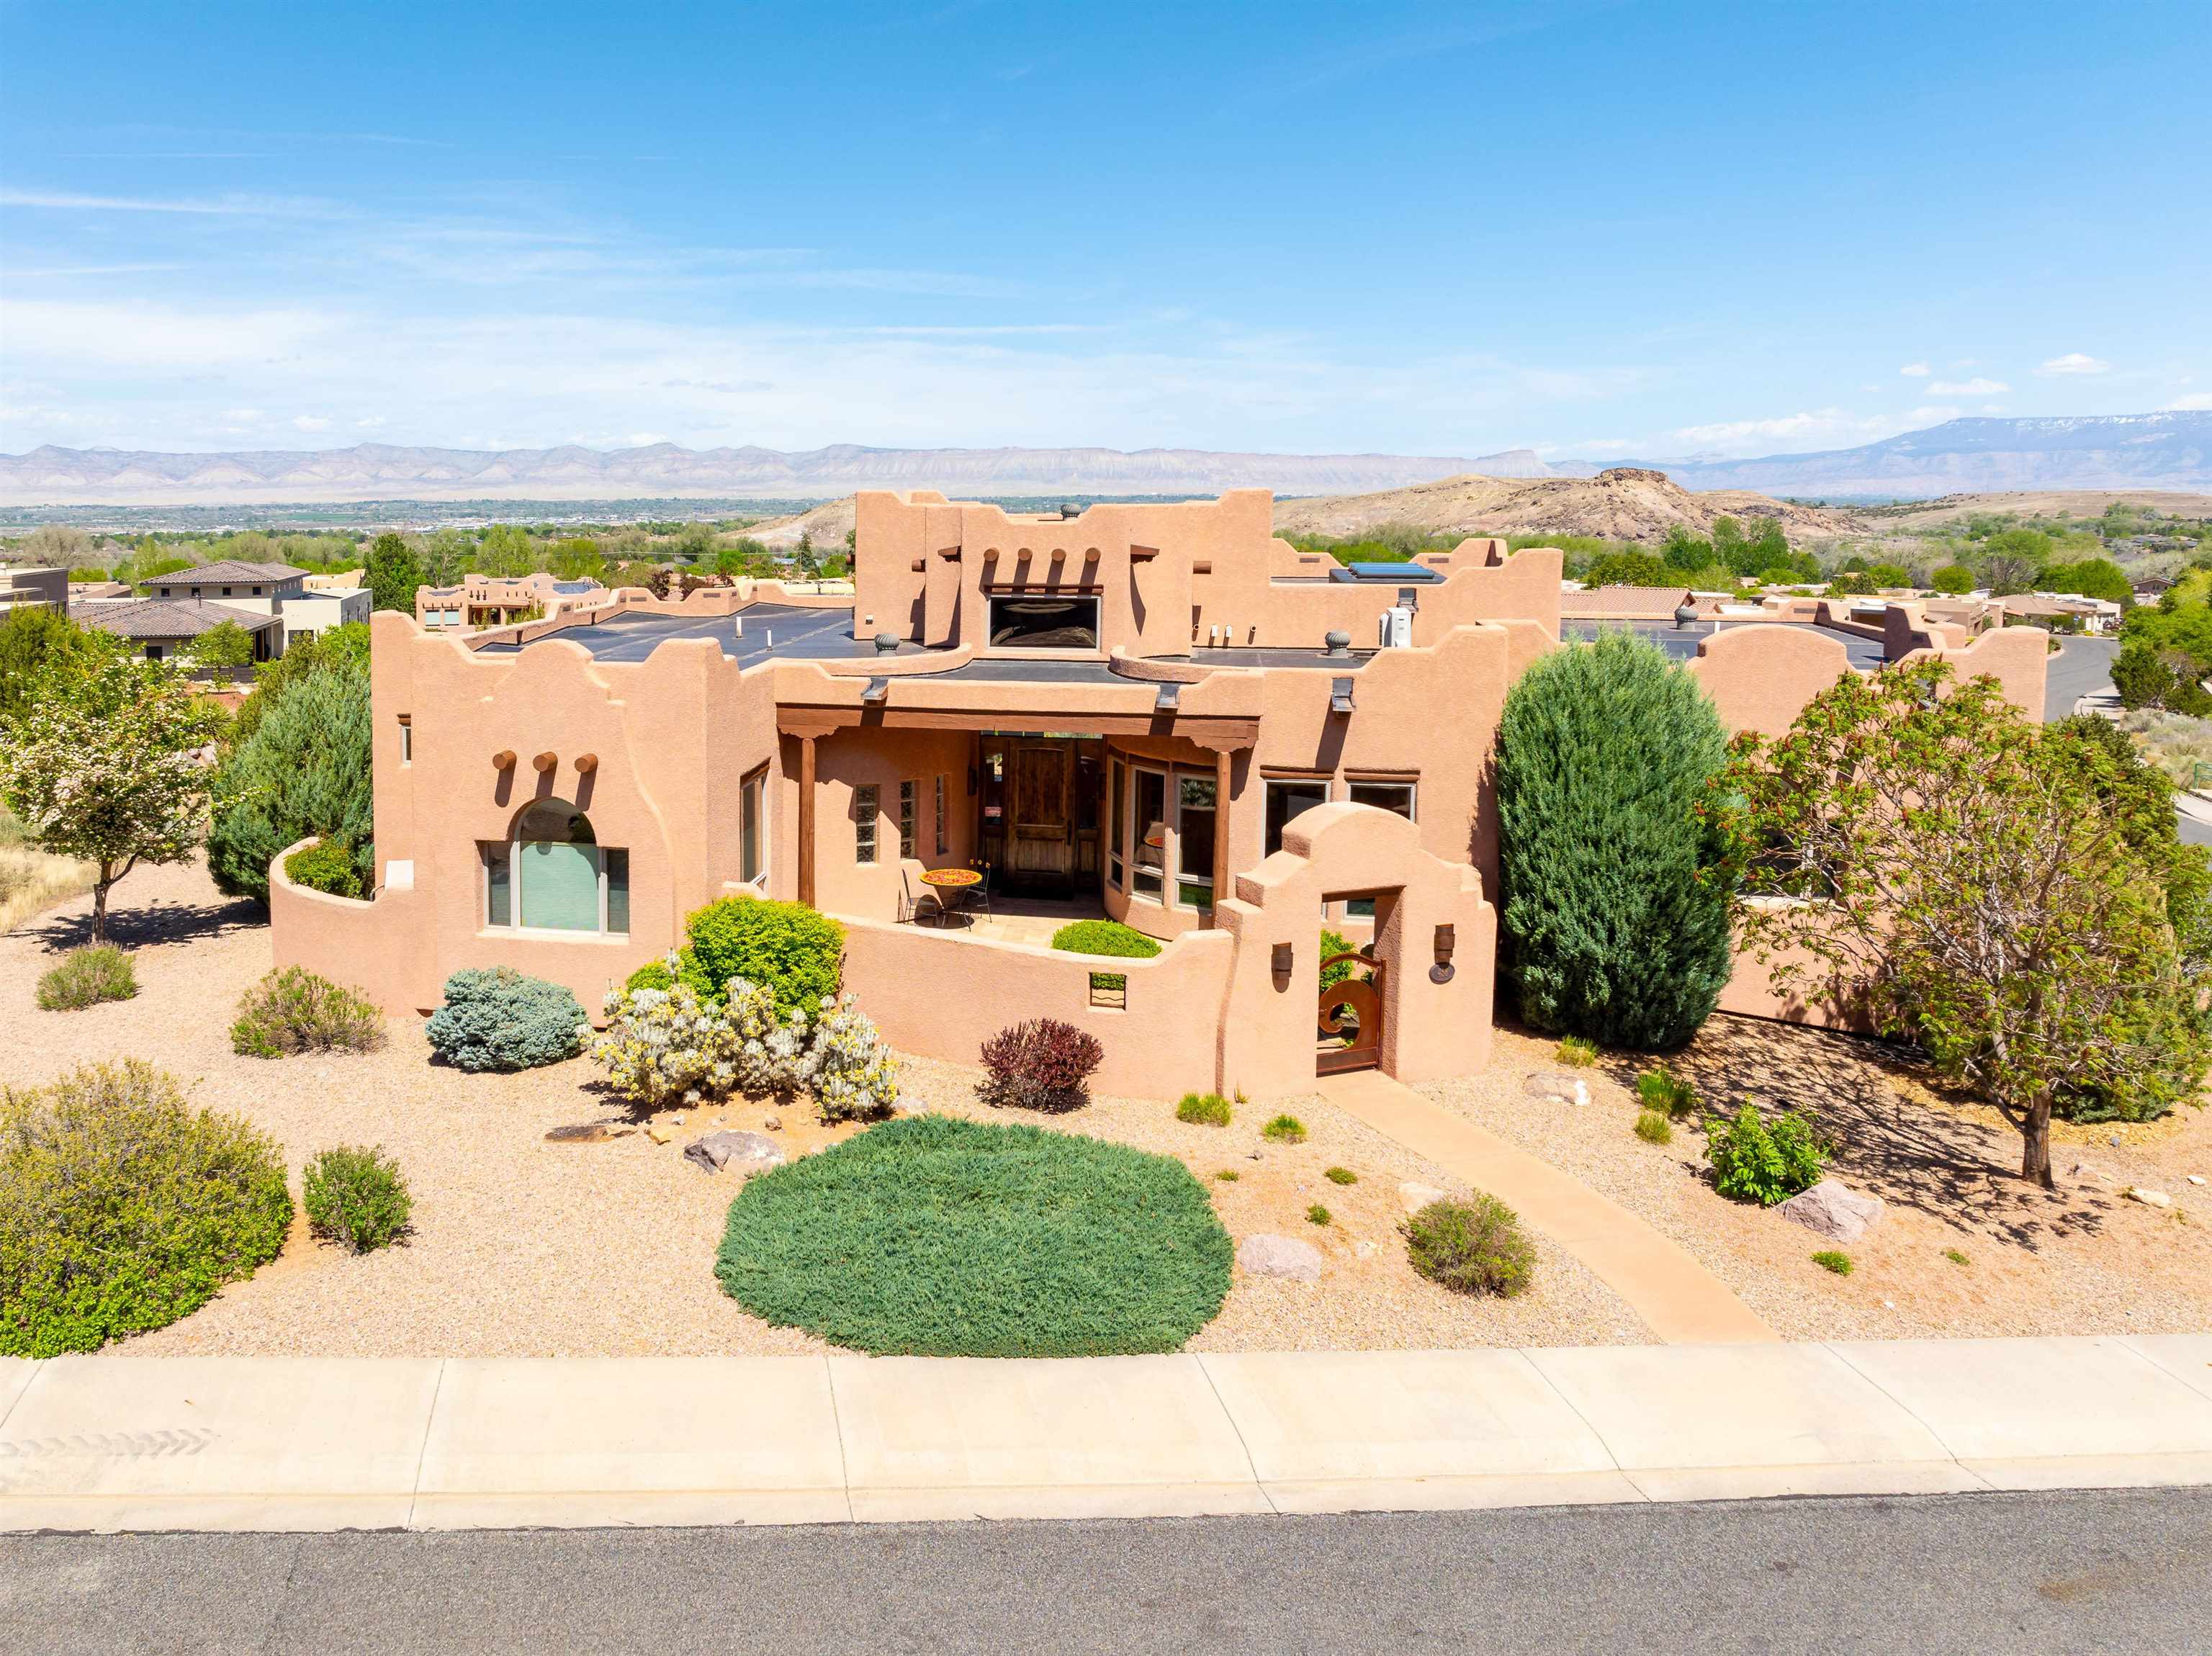 The minute you step in to this truly unique high-desert oasis you'll be wowed by gorgeous views out of every window and stunning detail throughout.  Built by Maves Construction, this Parade of Homes beauty has been carefully thought out, designed and maintained by the original owner/designer.  Featuring two kiva fireplaces, soaring ceilings with vigas and custom, 8 ft knotty alder doors and cabinetry, all bedrooms have an ensuite bath and ample closet space. The gourmet kitchen will please the most discerning of cooks. Wine connoisseurs will appreciate the wine room adjacent to the formal dining space, a great opportunity to take in the Monument view. Outside, you'll find multiple patios, an outdoor kitchen with granite countertops, a stunning water feature and multiple vantage points to take in the best of the Grand Valley landscapes. An elevator ride to the lower level leads to the bonus room, 1/2 bath, oversized 3 car garage and extra storage. This home has been carefully curated and maintained, furnishings are negotiable.  Book your private showing today!